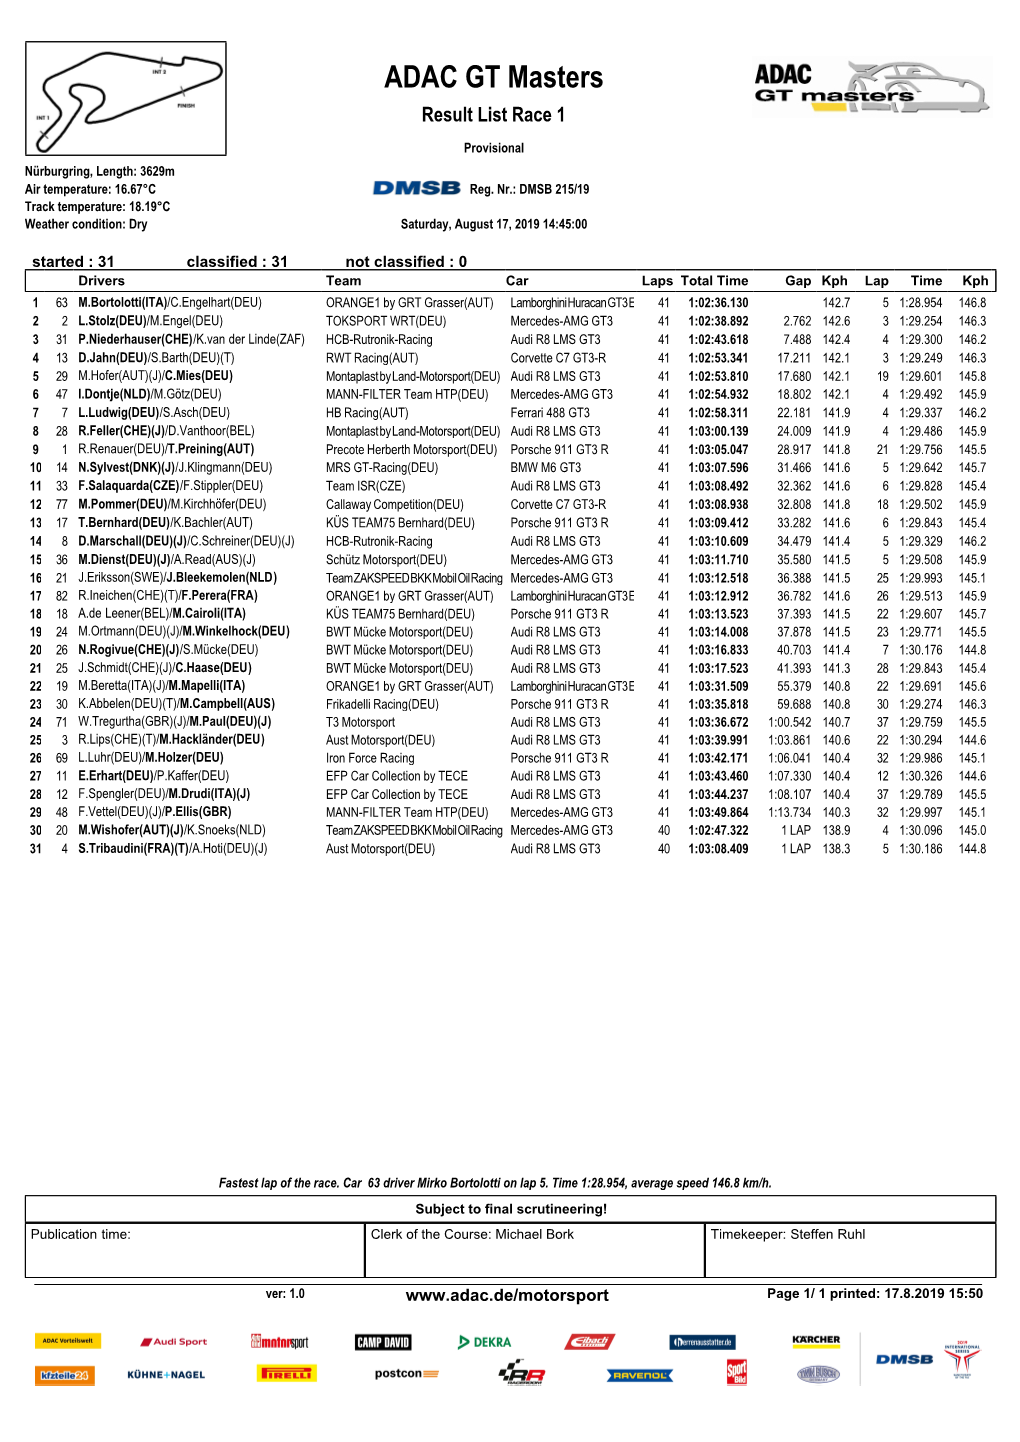 ADAC GT Masters Result List Race 1